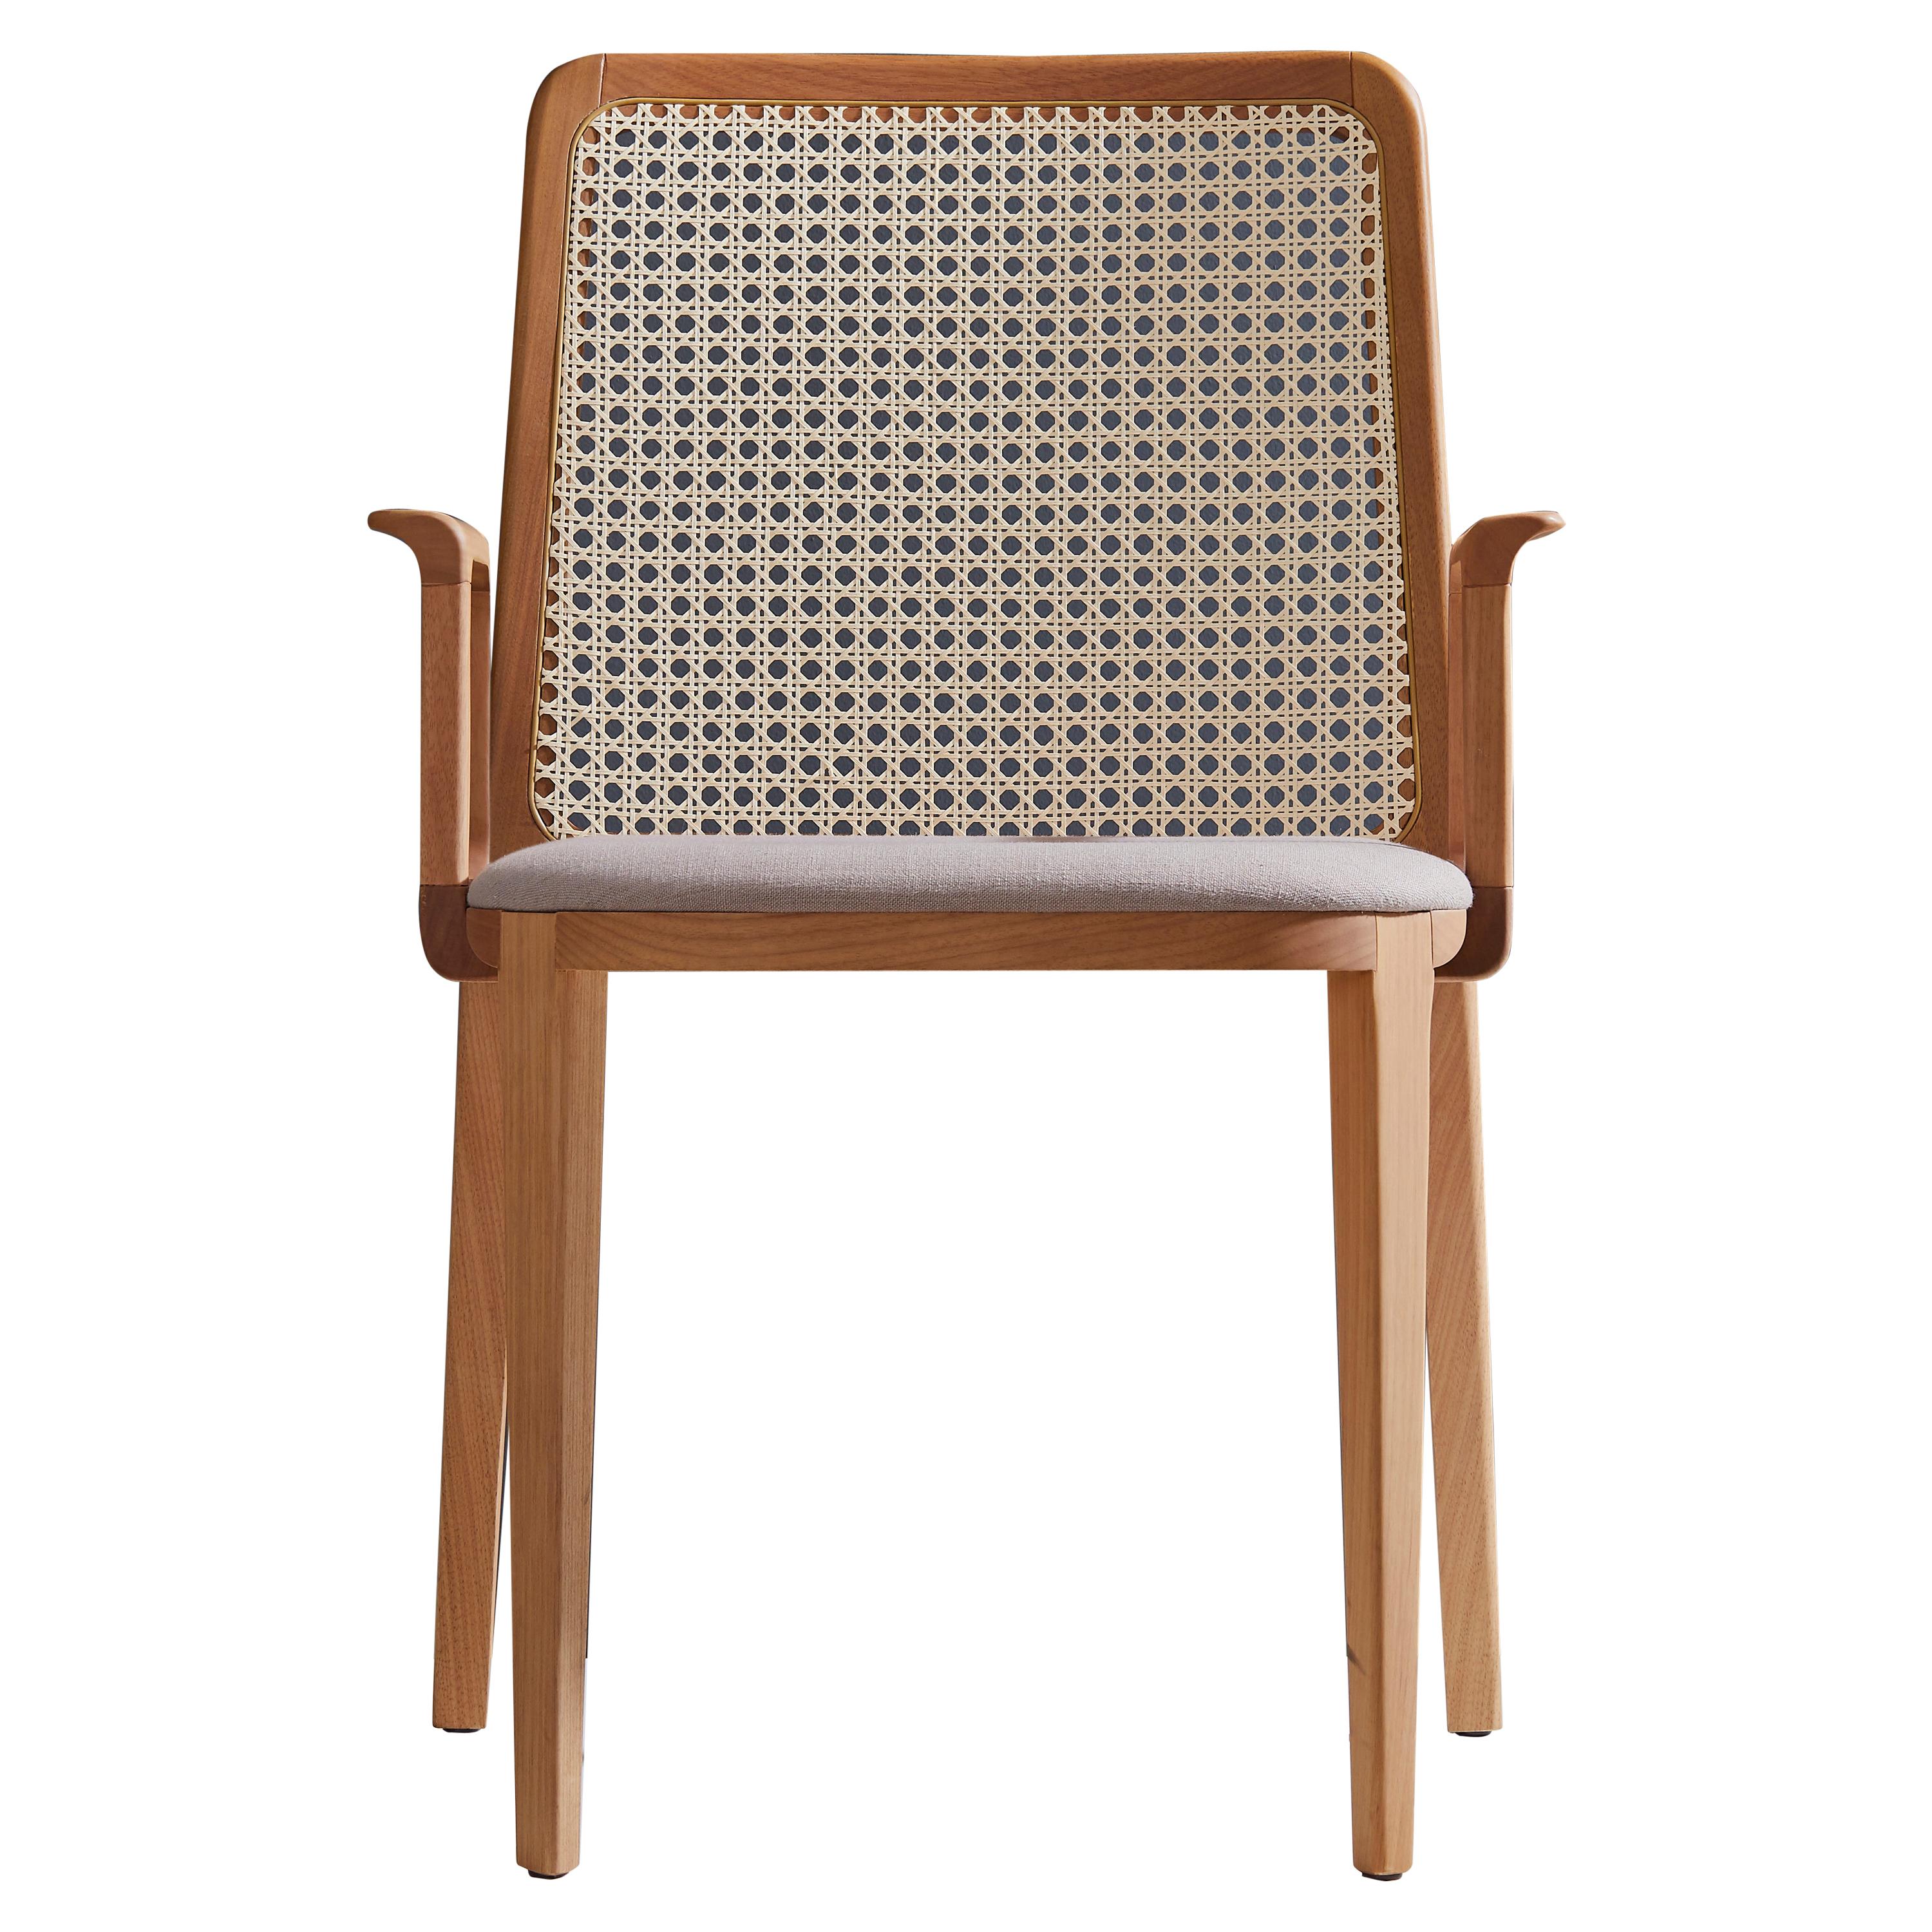 Minimal Style, Solid Wood Chair, Textile Seating, Caning Backboard, with Arms For Sale